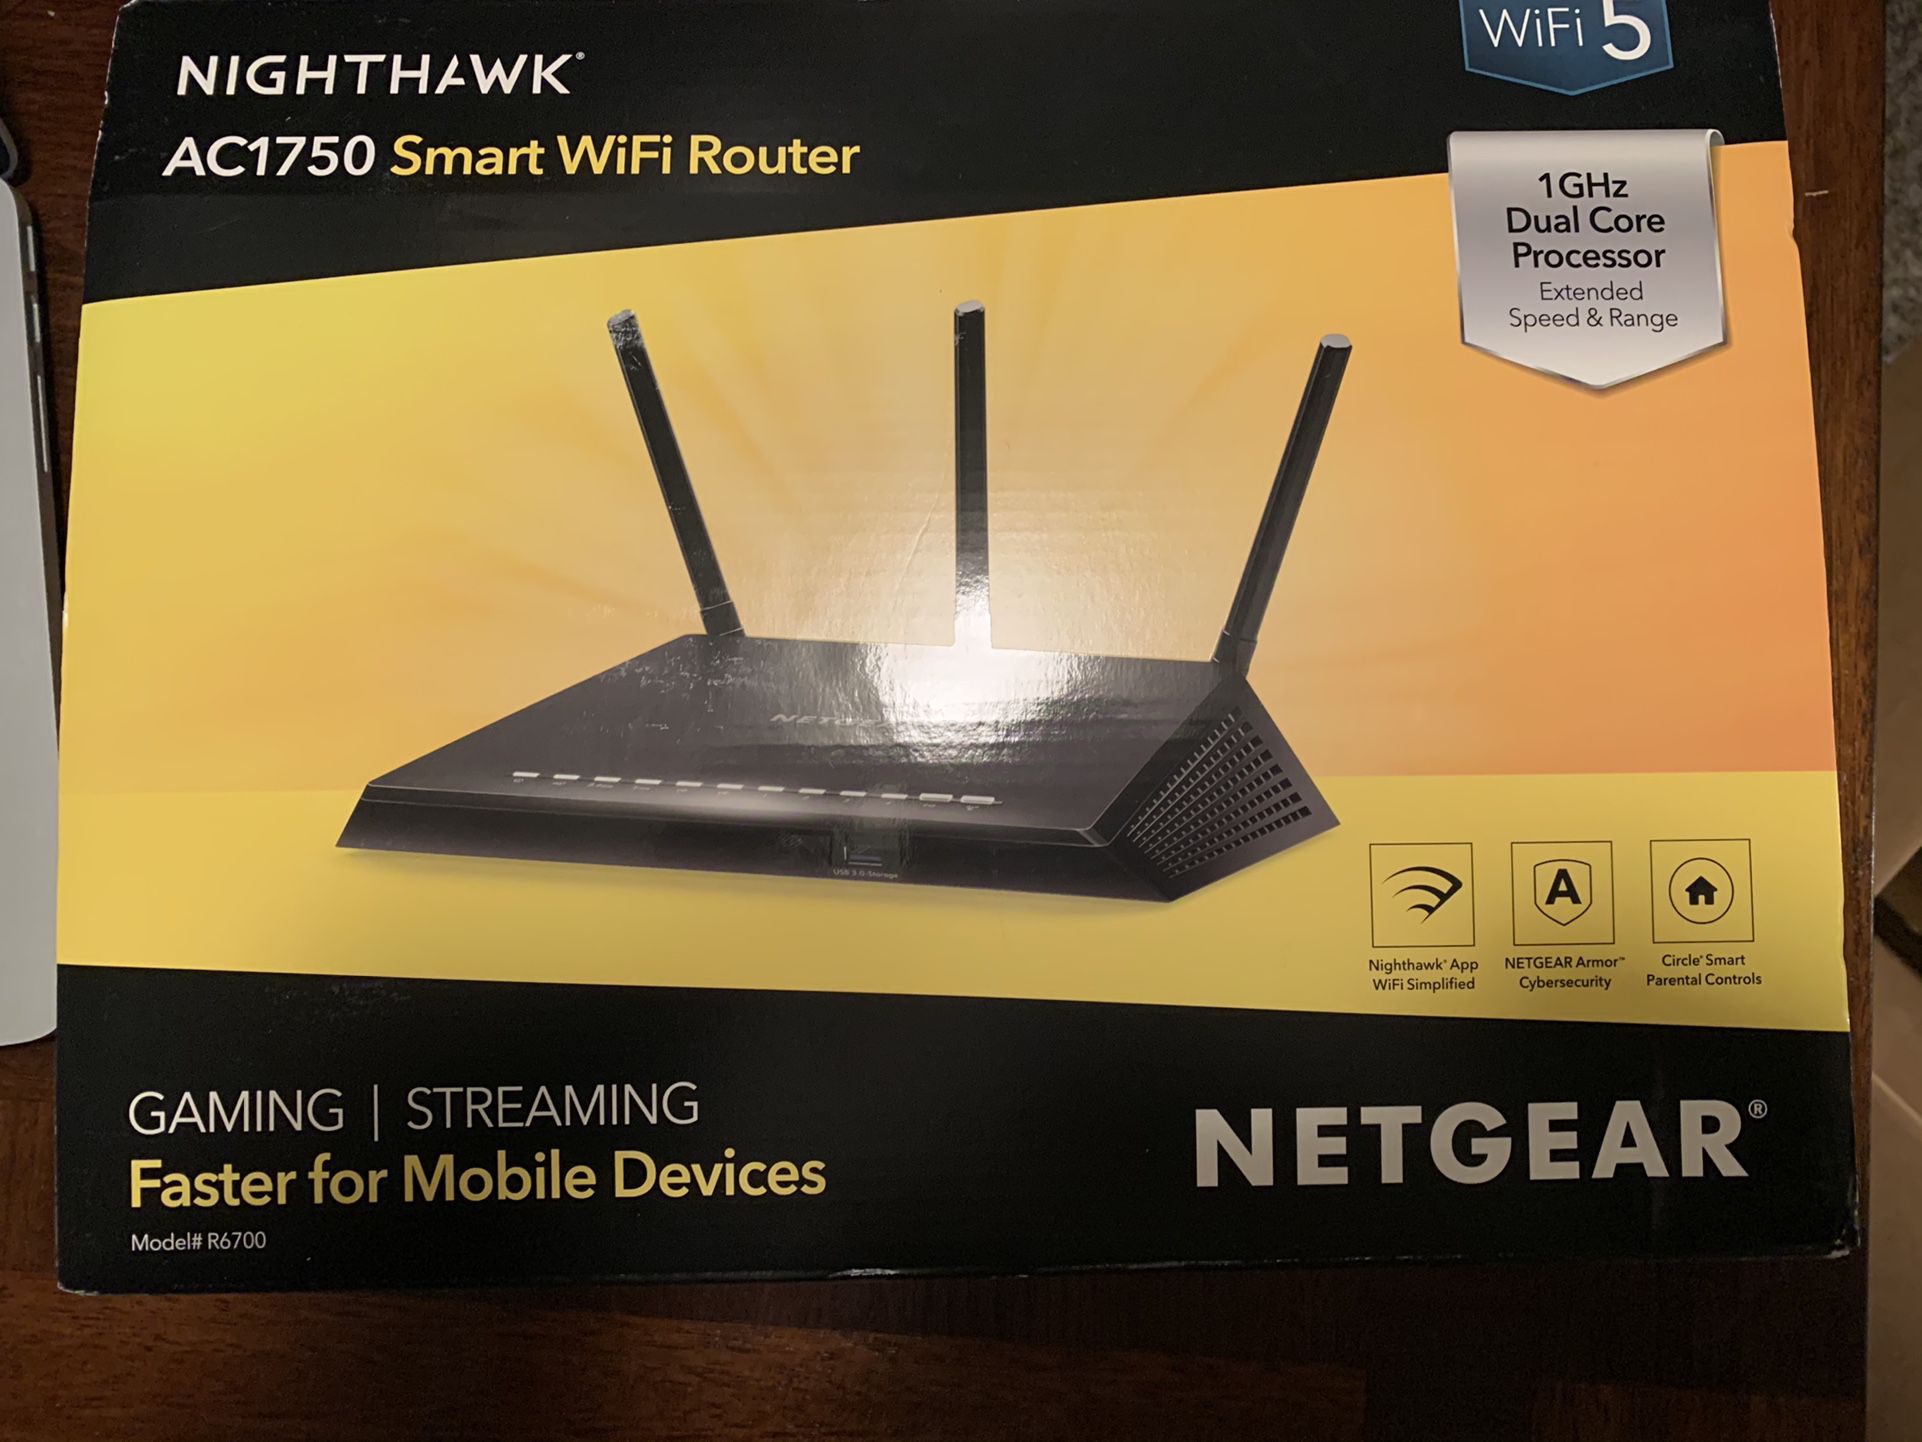 NETGEAR Nighthawk Smart Wi-Fi Router, R6700v3 - AC1750 Wireless Speed Up to 1750 Mbps